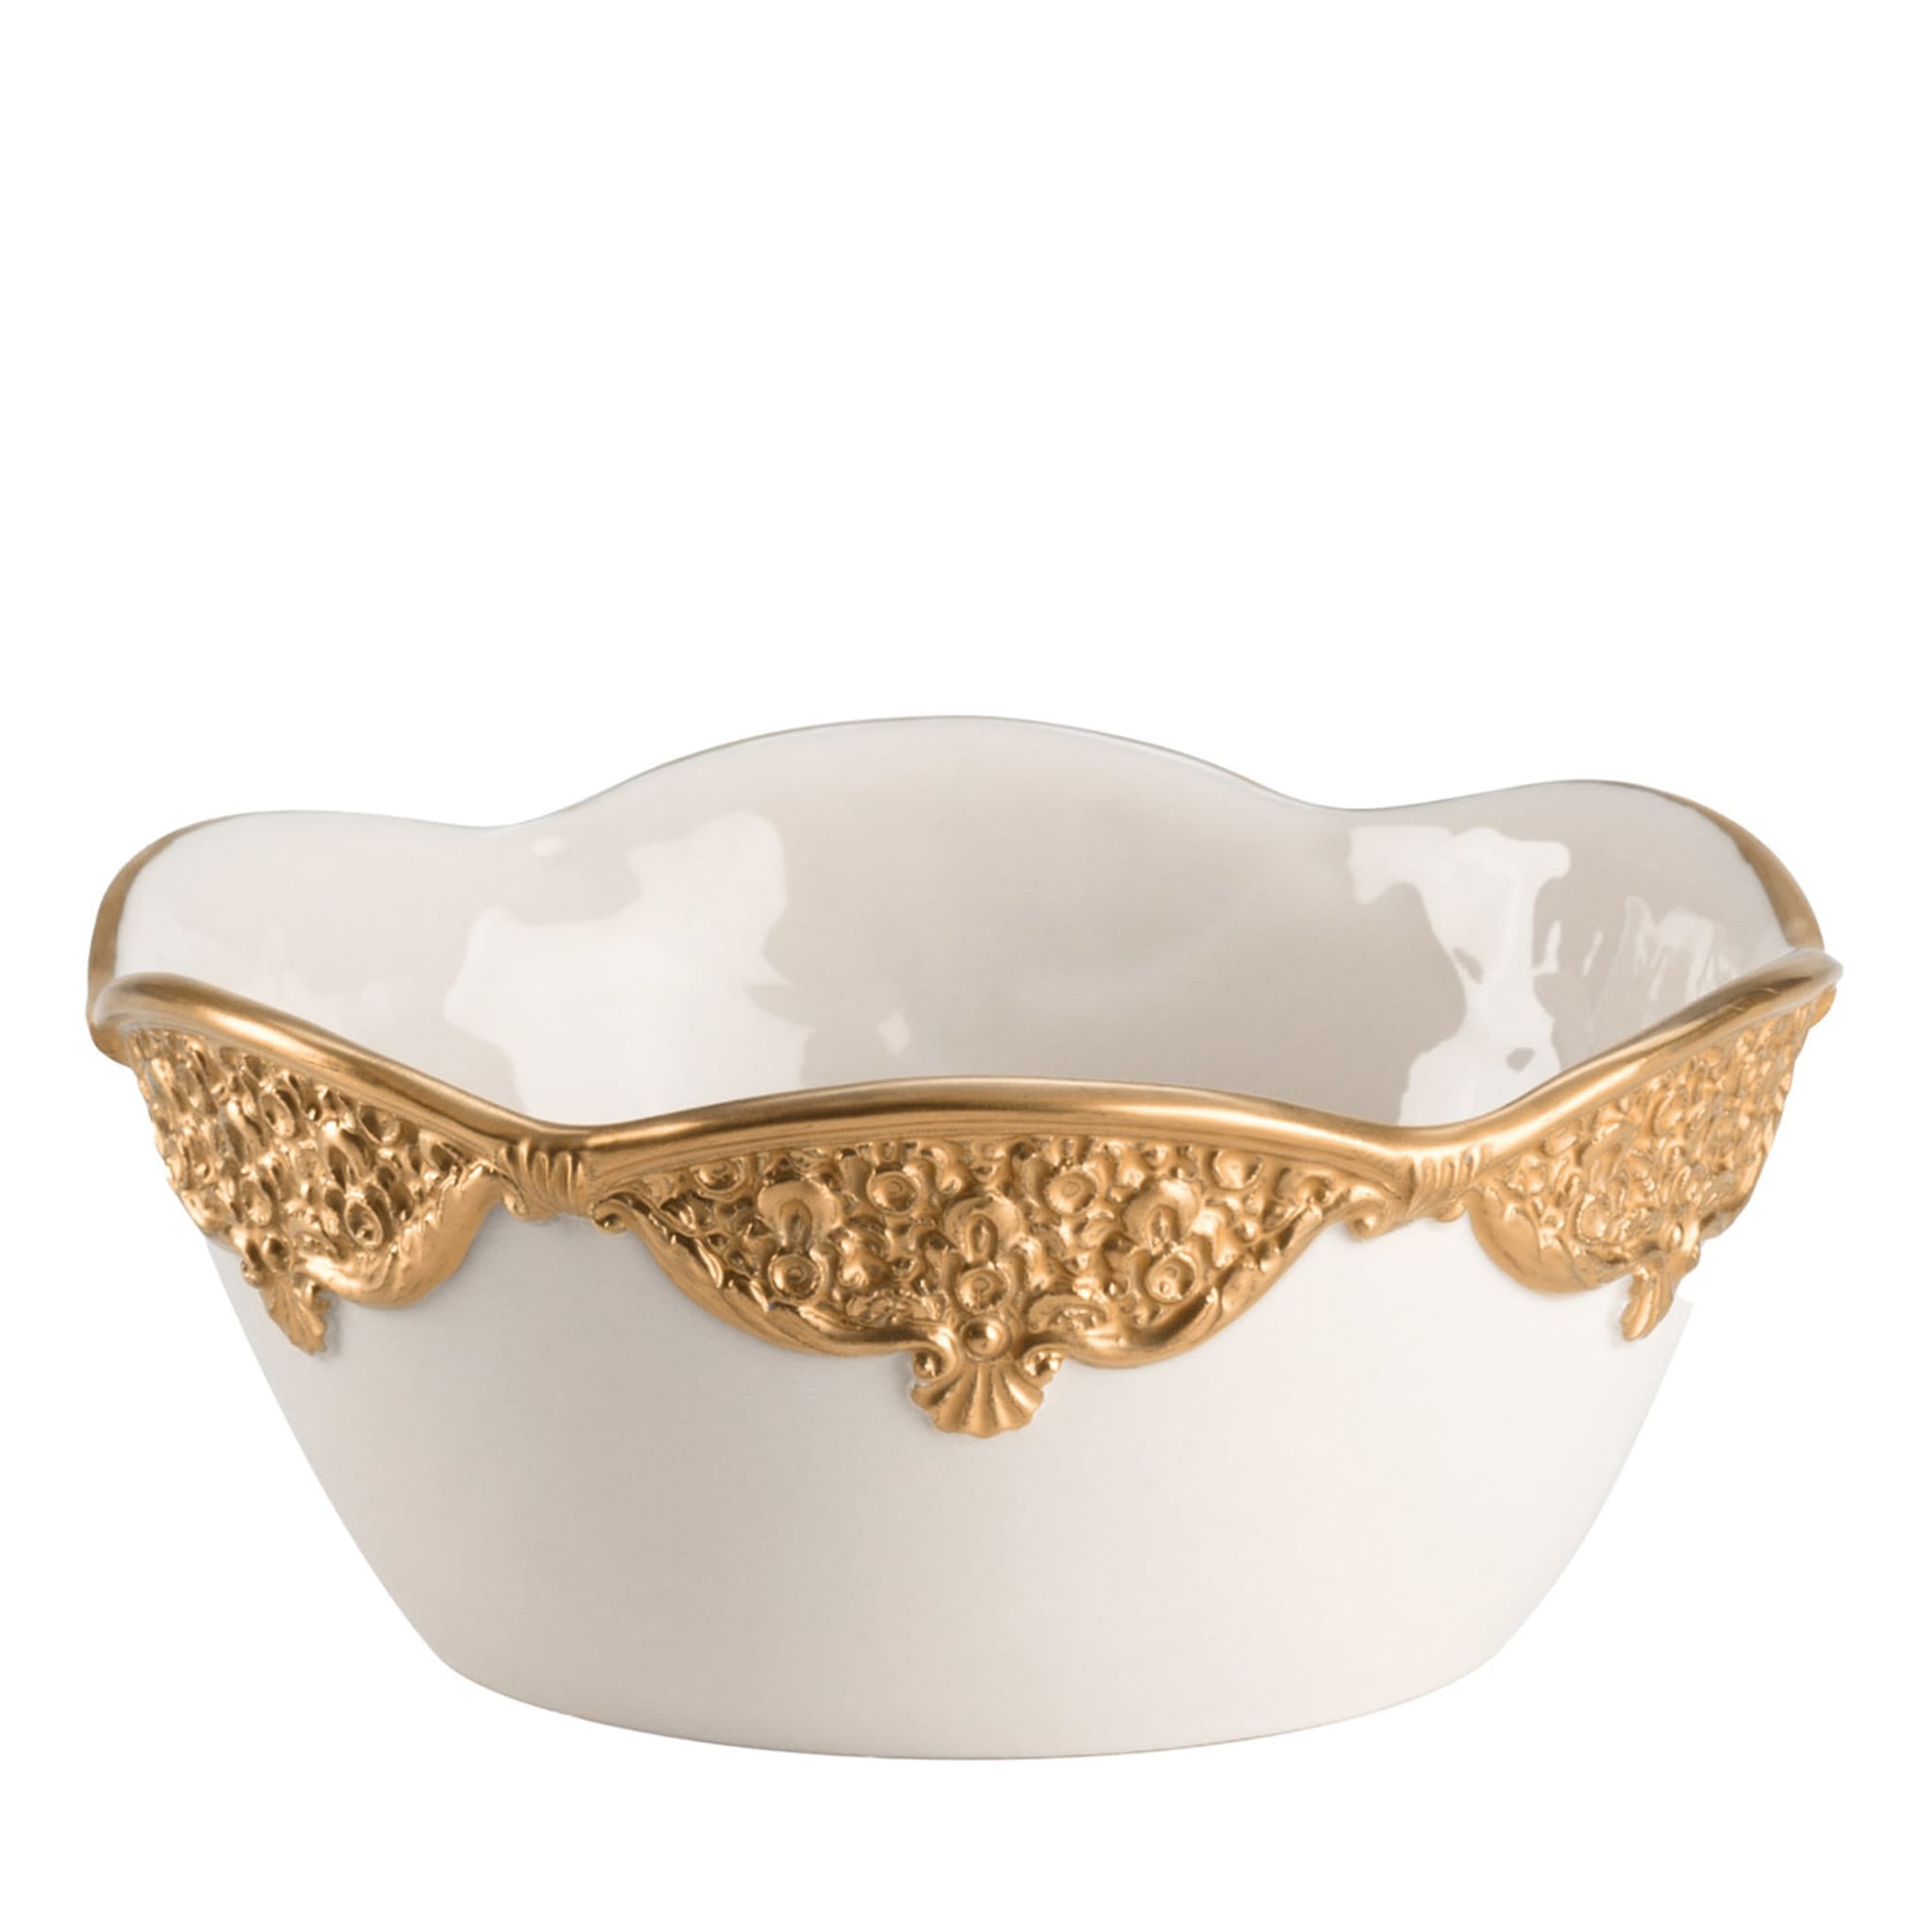 Caterina Small White & Gold Bowl - Main view